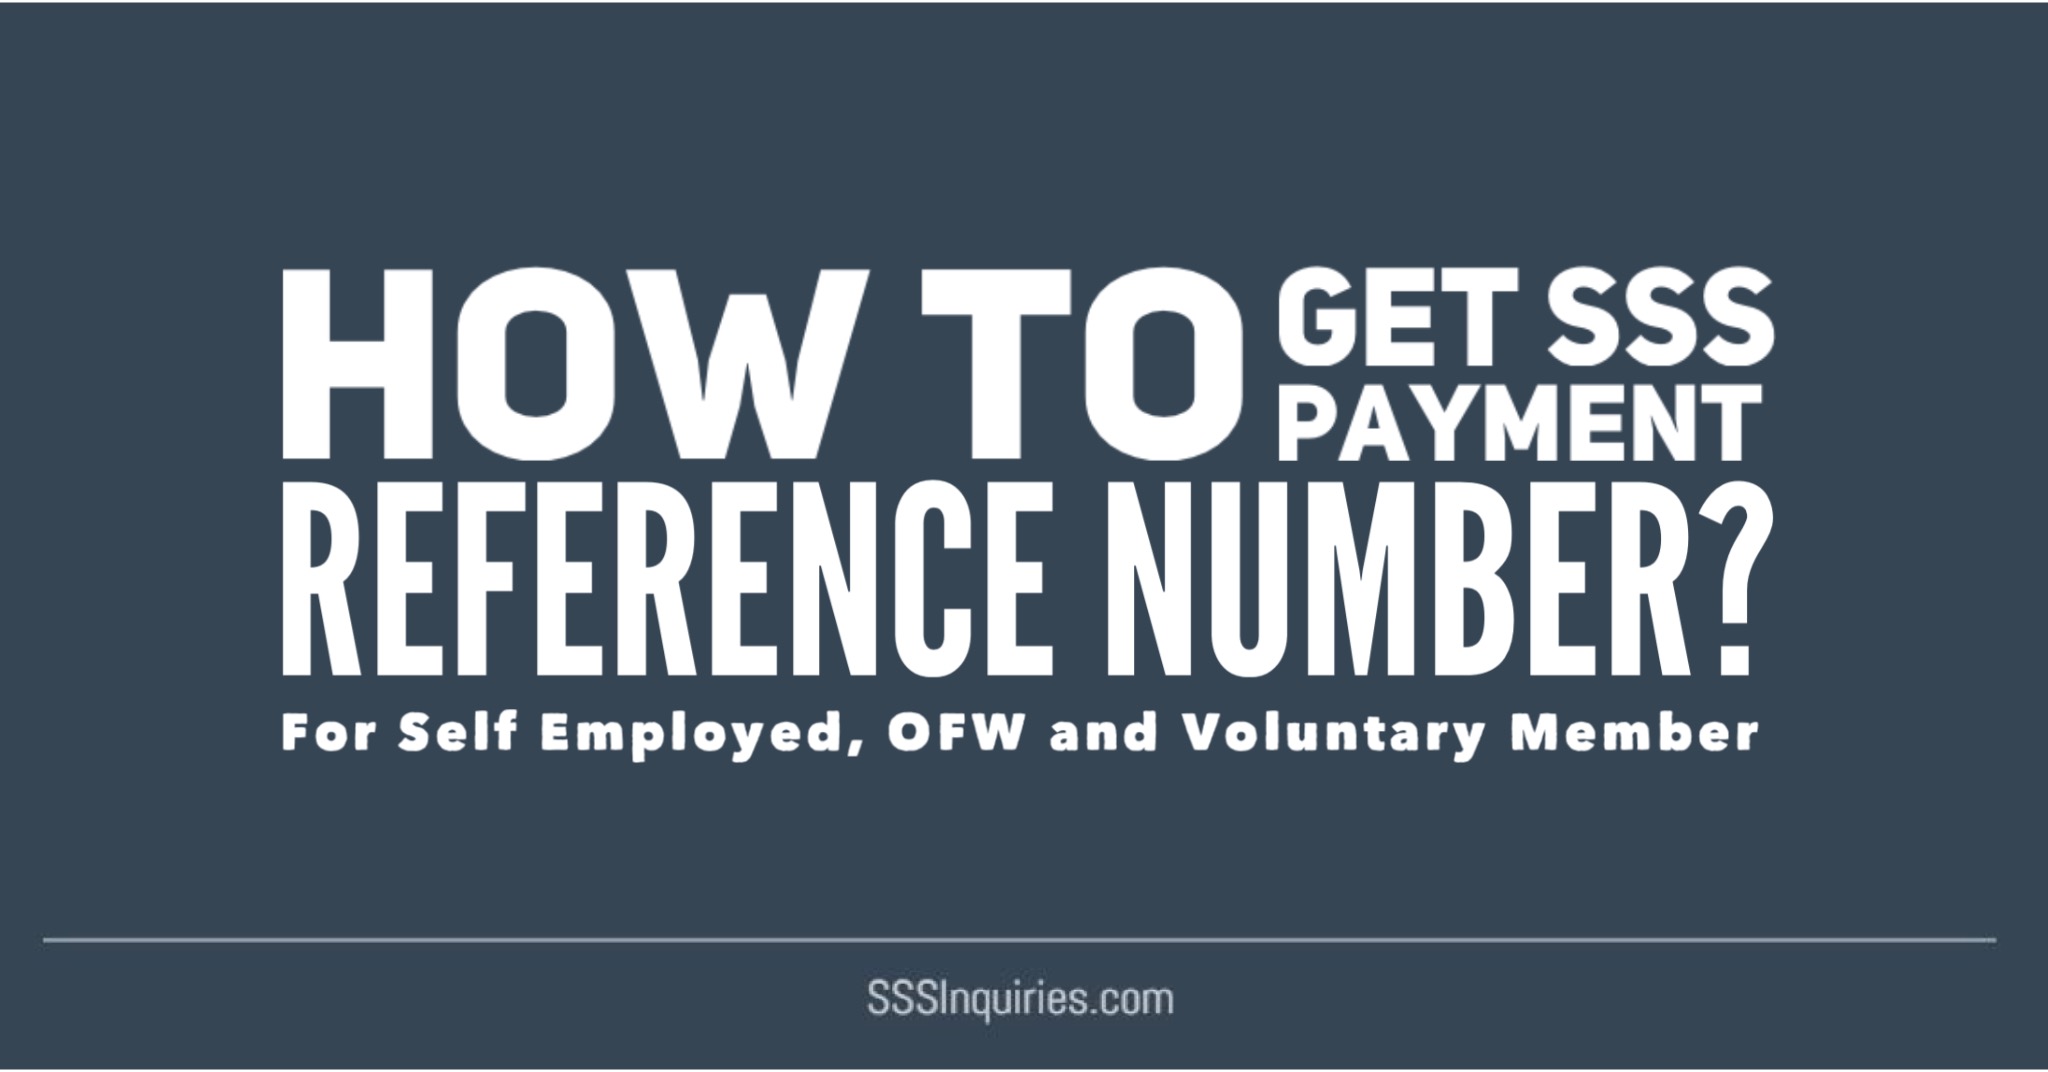 How to get SSS Payment Reference Number for Self Employed, OFW and Voluntary Members?